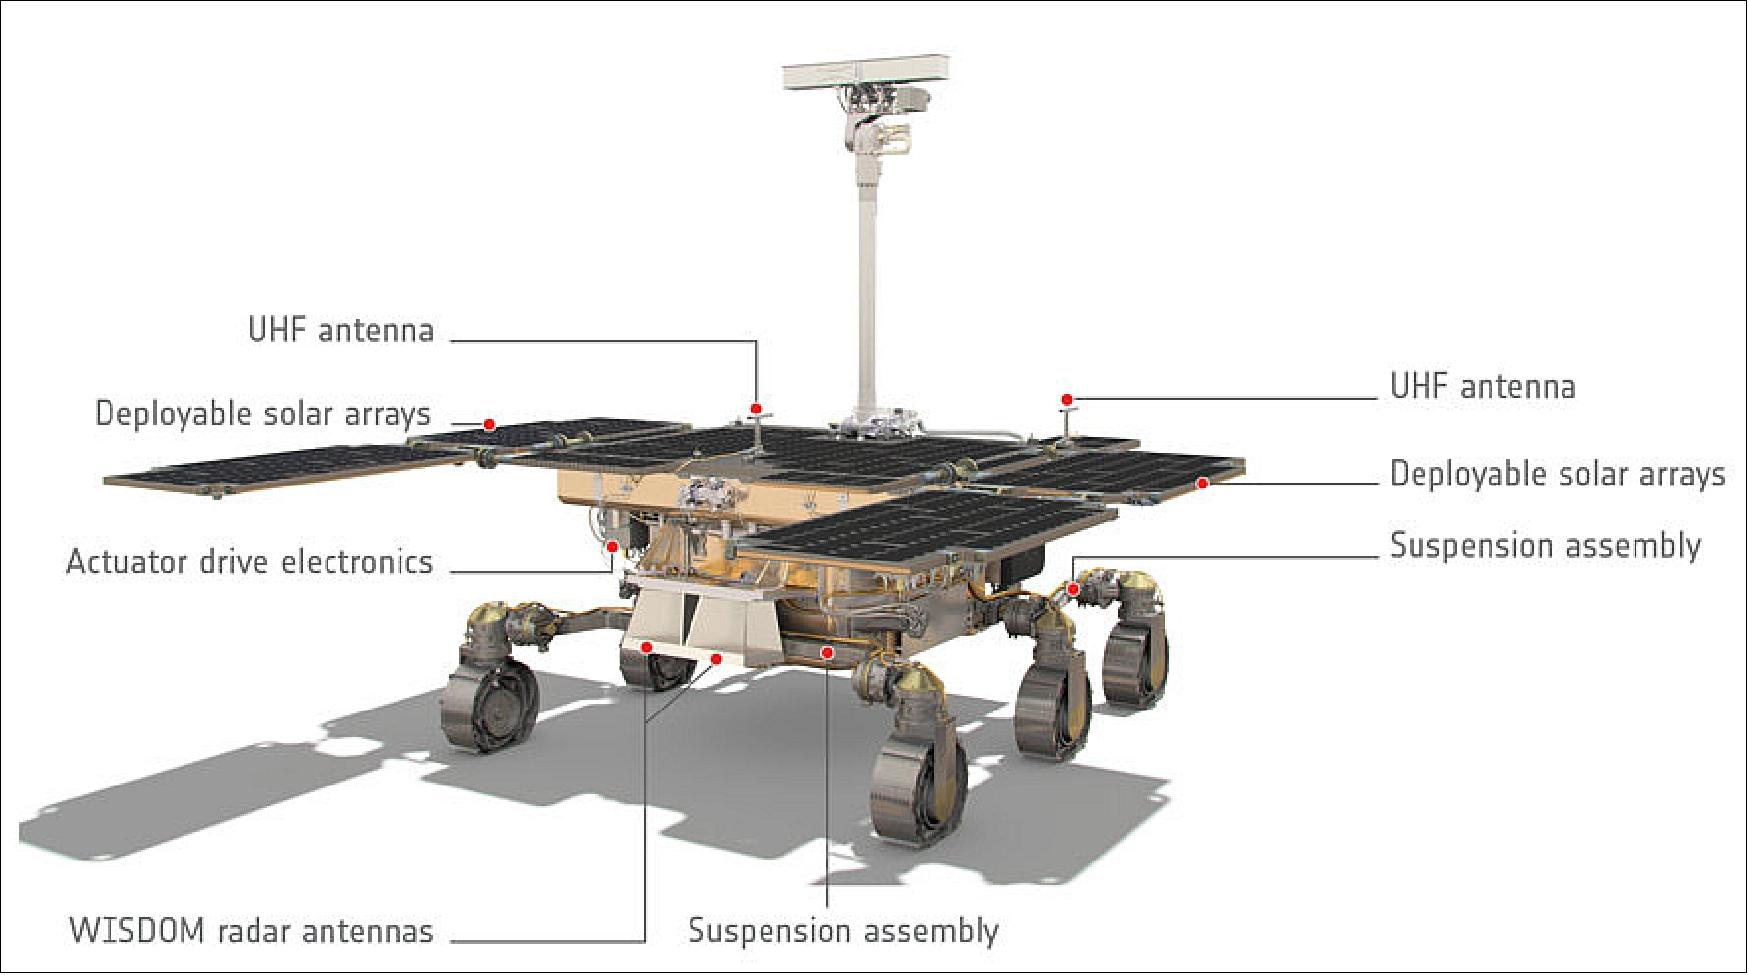 Figure 108: Artist’s impression of the ExoMars 2020 rover. This image shows the rover as viewed from behind (image credit: ESA/ATG medialab)